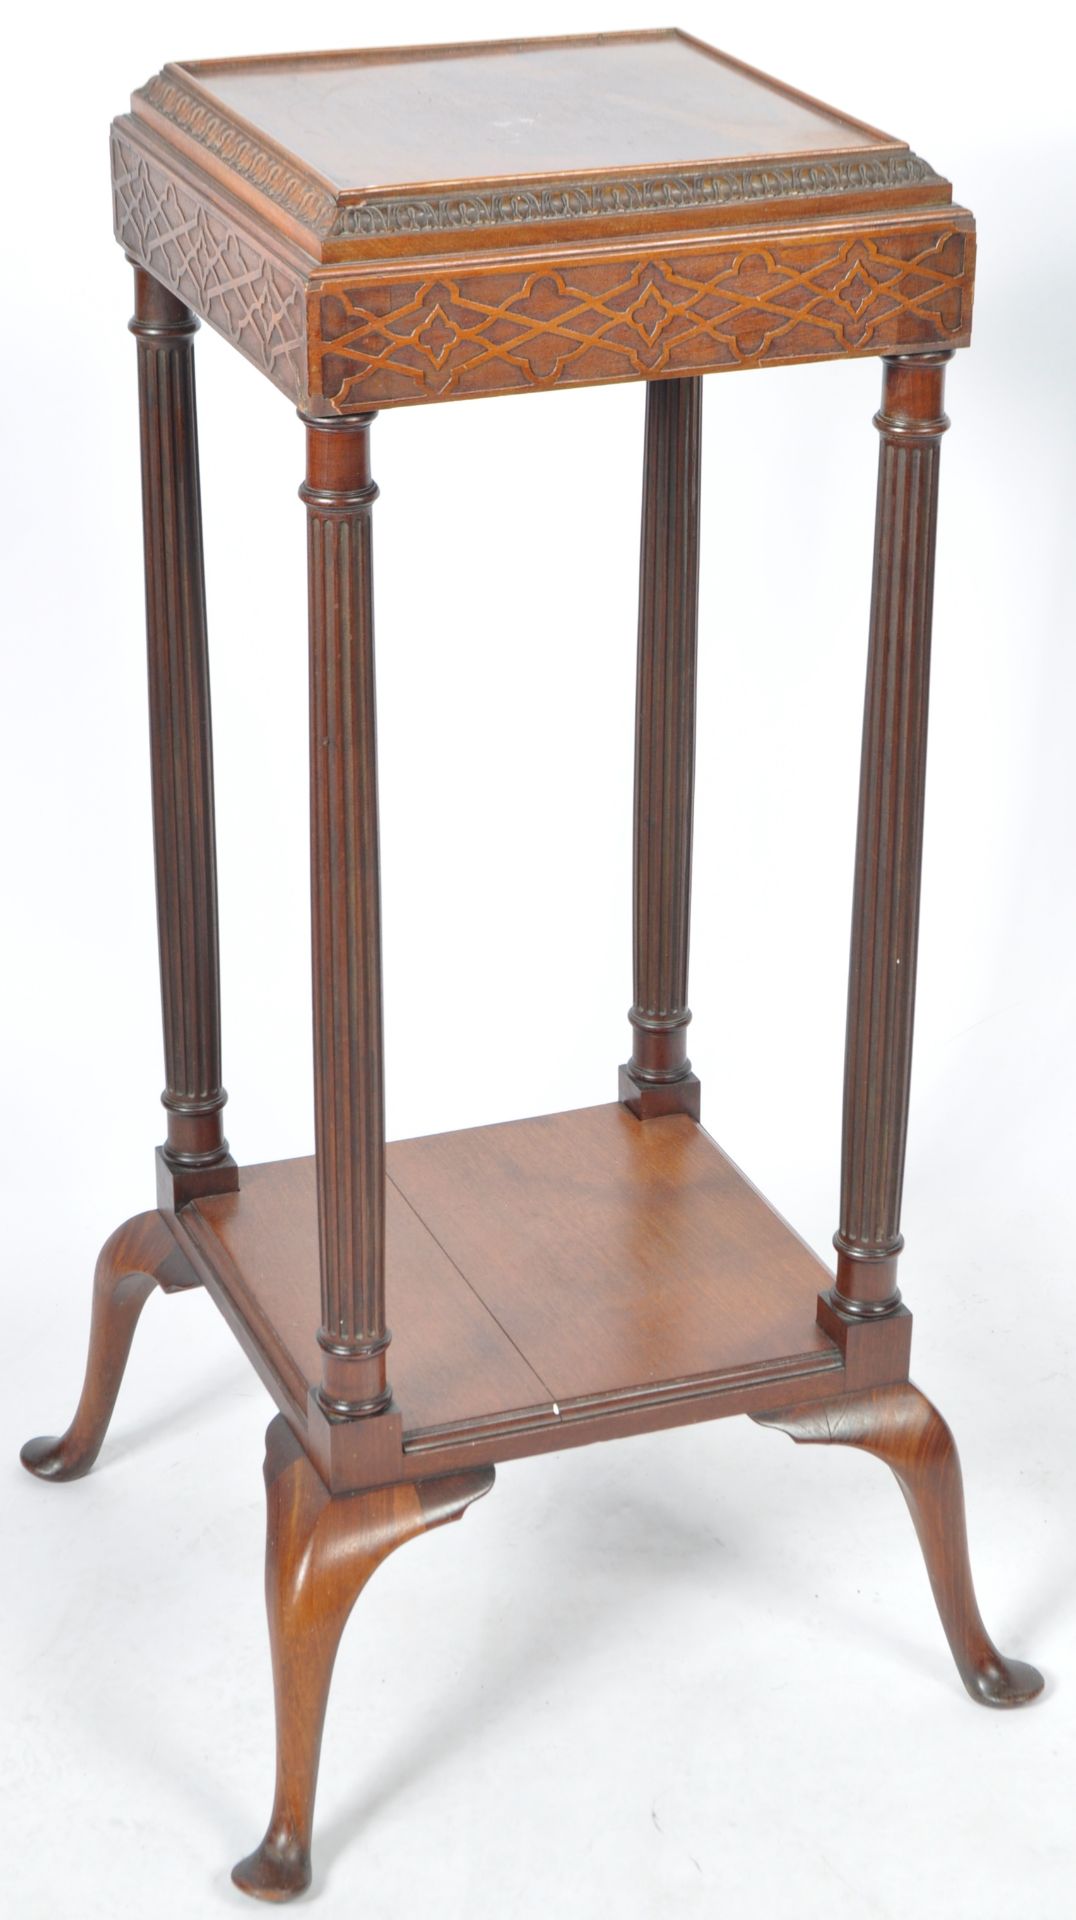 ANTIQUE 19TH CENTURY MAHOGANY BUST STAND - Image 3 of 7